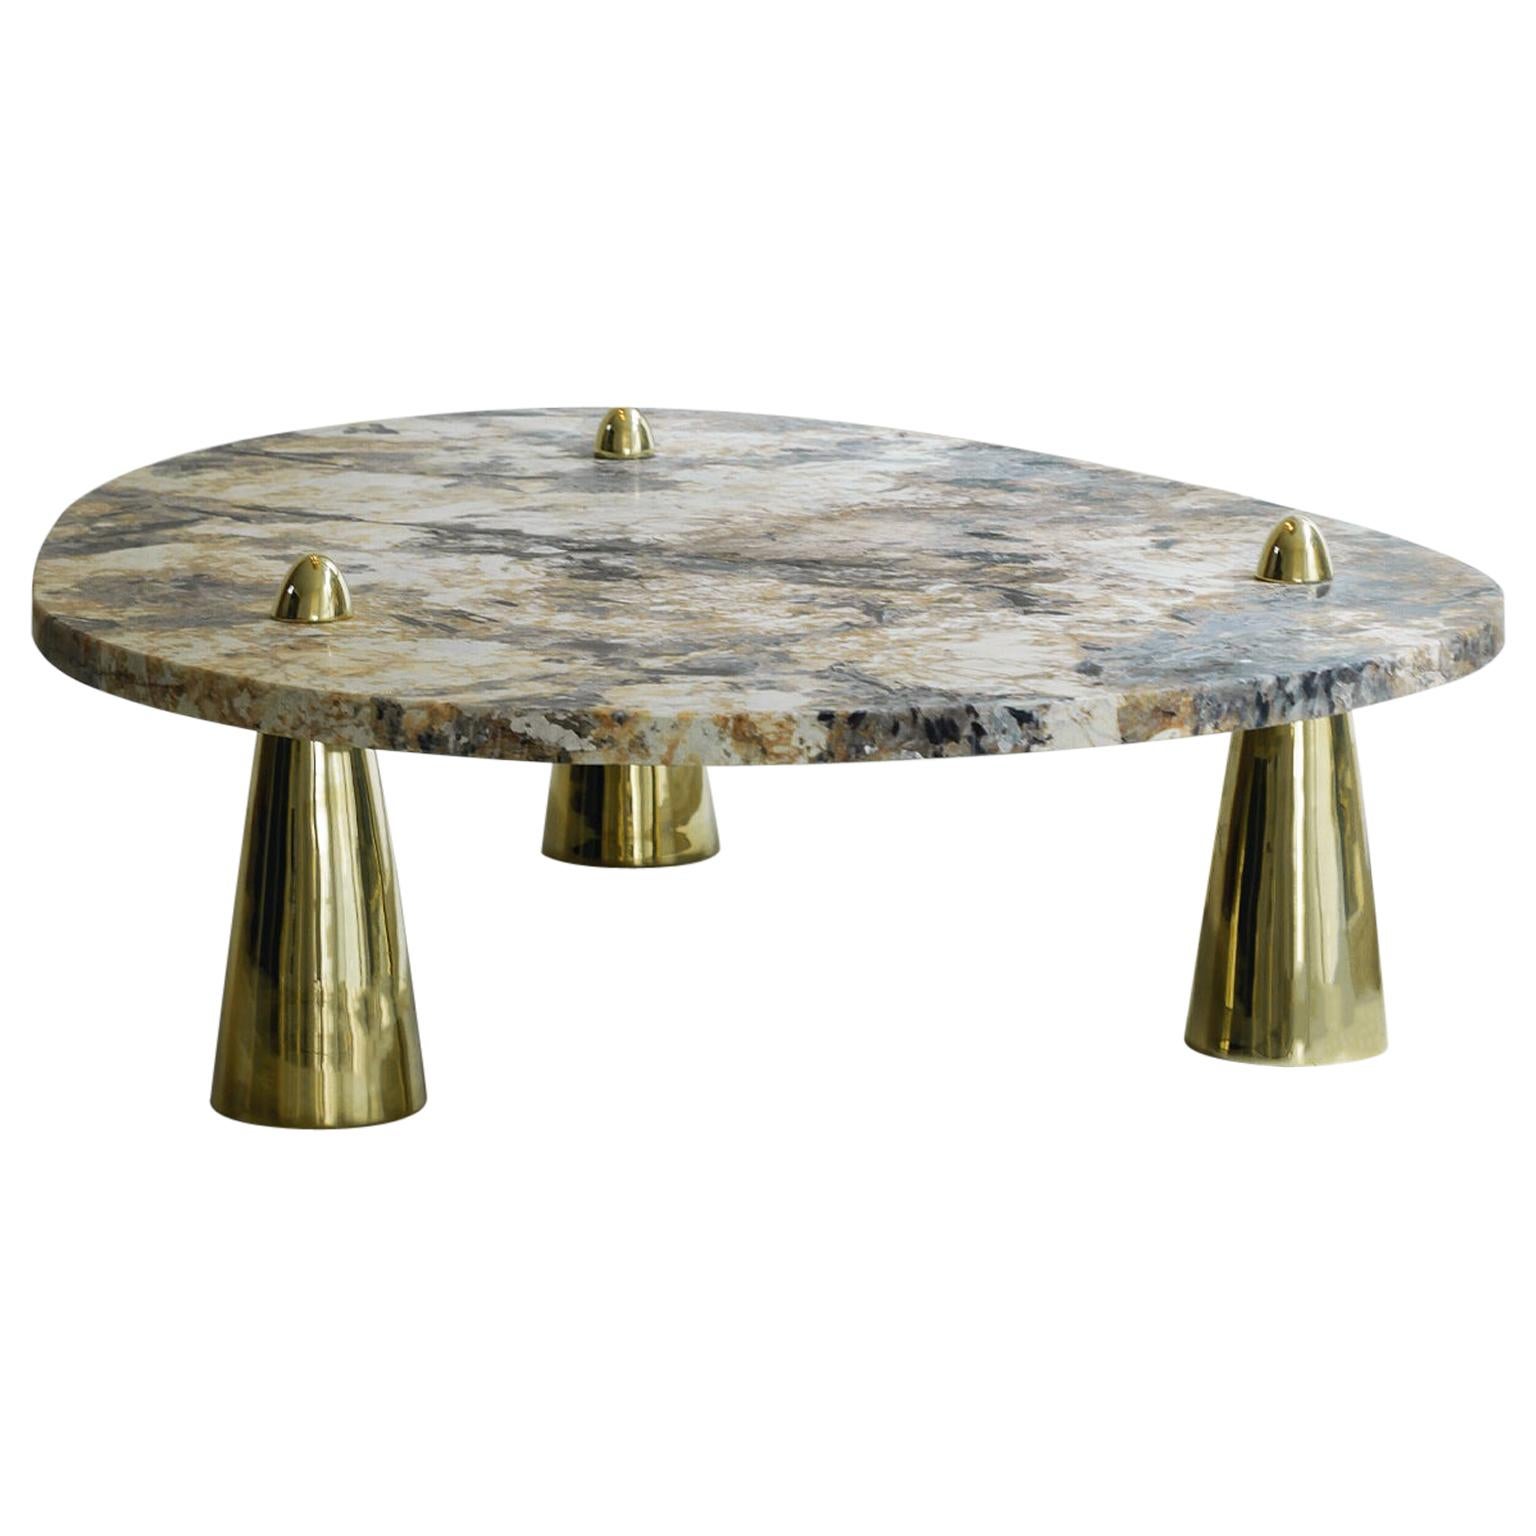 Center Table in Granite and Cast Brass